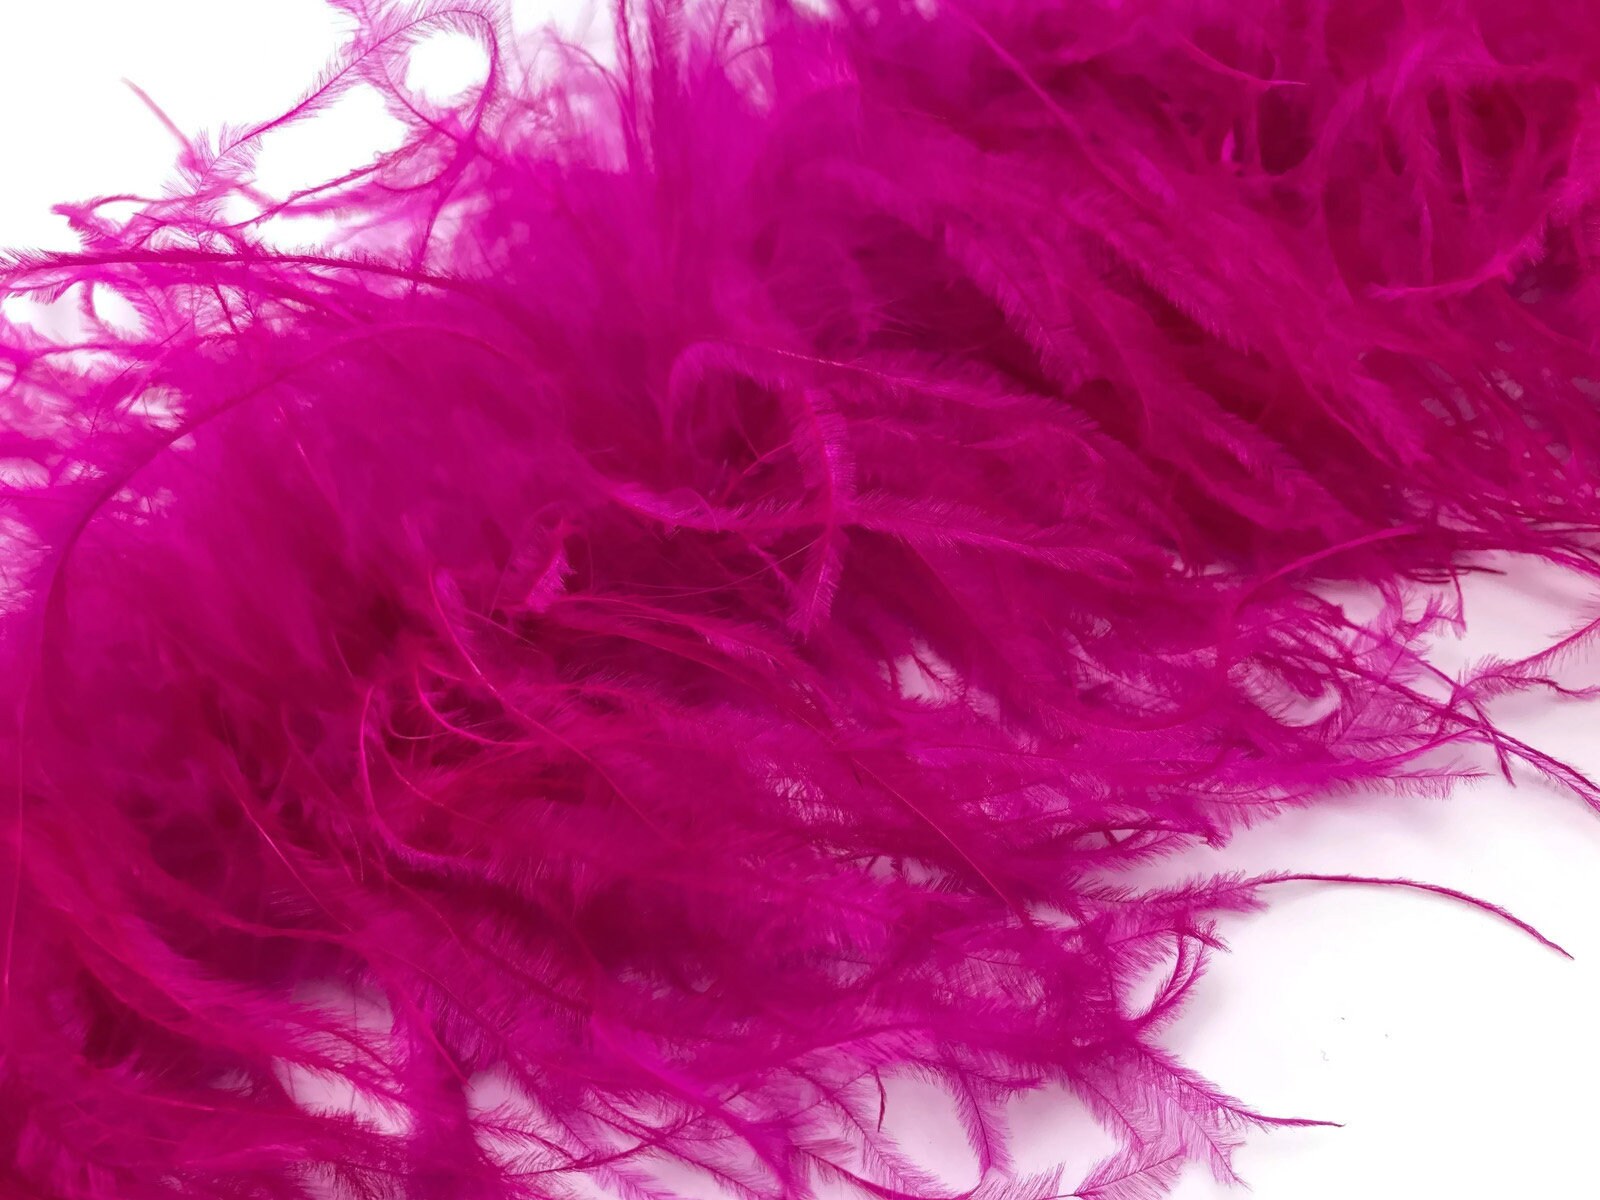 2 Yards - Candy Pink 3 Ply Ostrich Medium Weight Fluffy Feather Boa